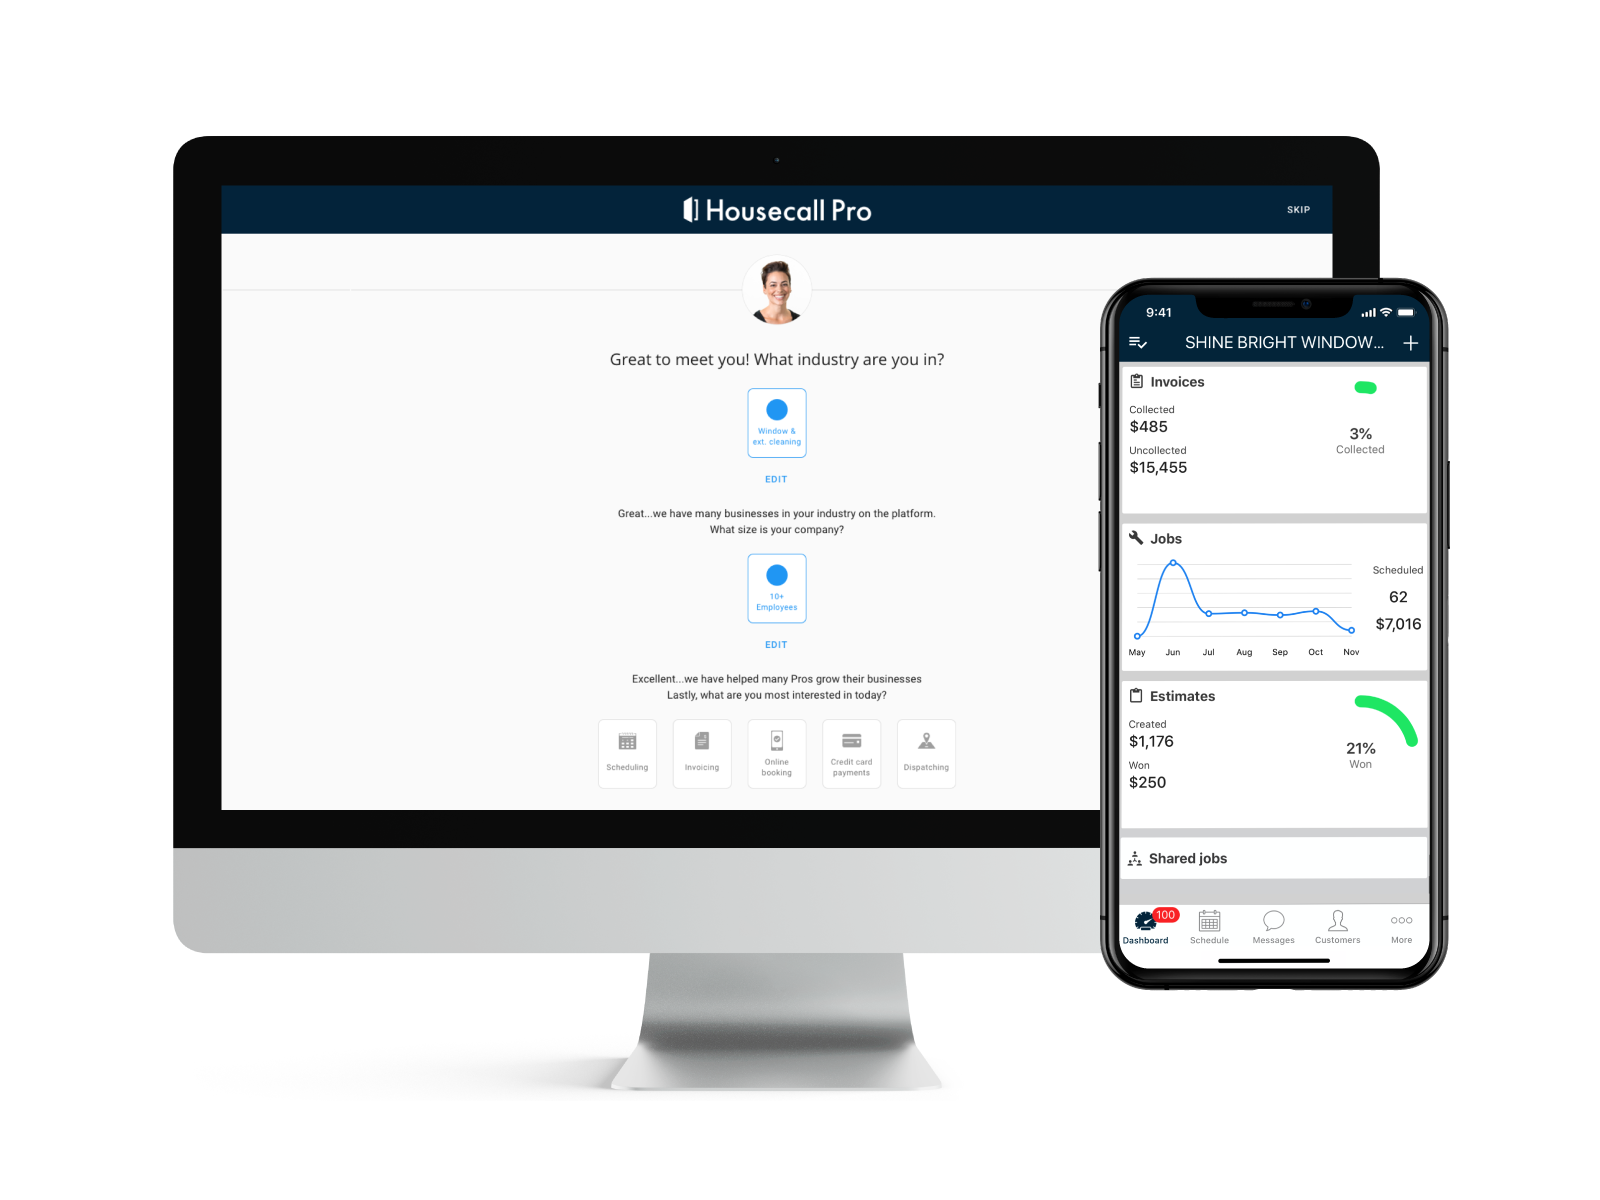 Housecall Pro Software - An easy-to-use interface and dashboard help you manage all aspects of your business: scheduling, dispatching, estimates, invoices, reviews and more.